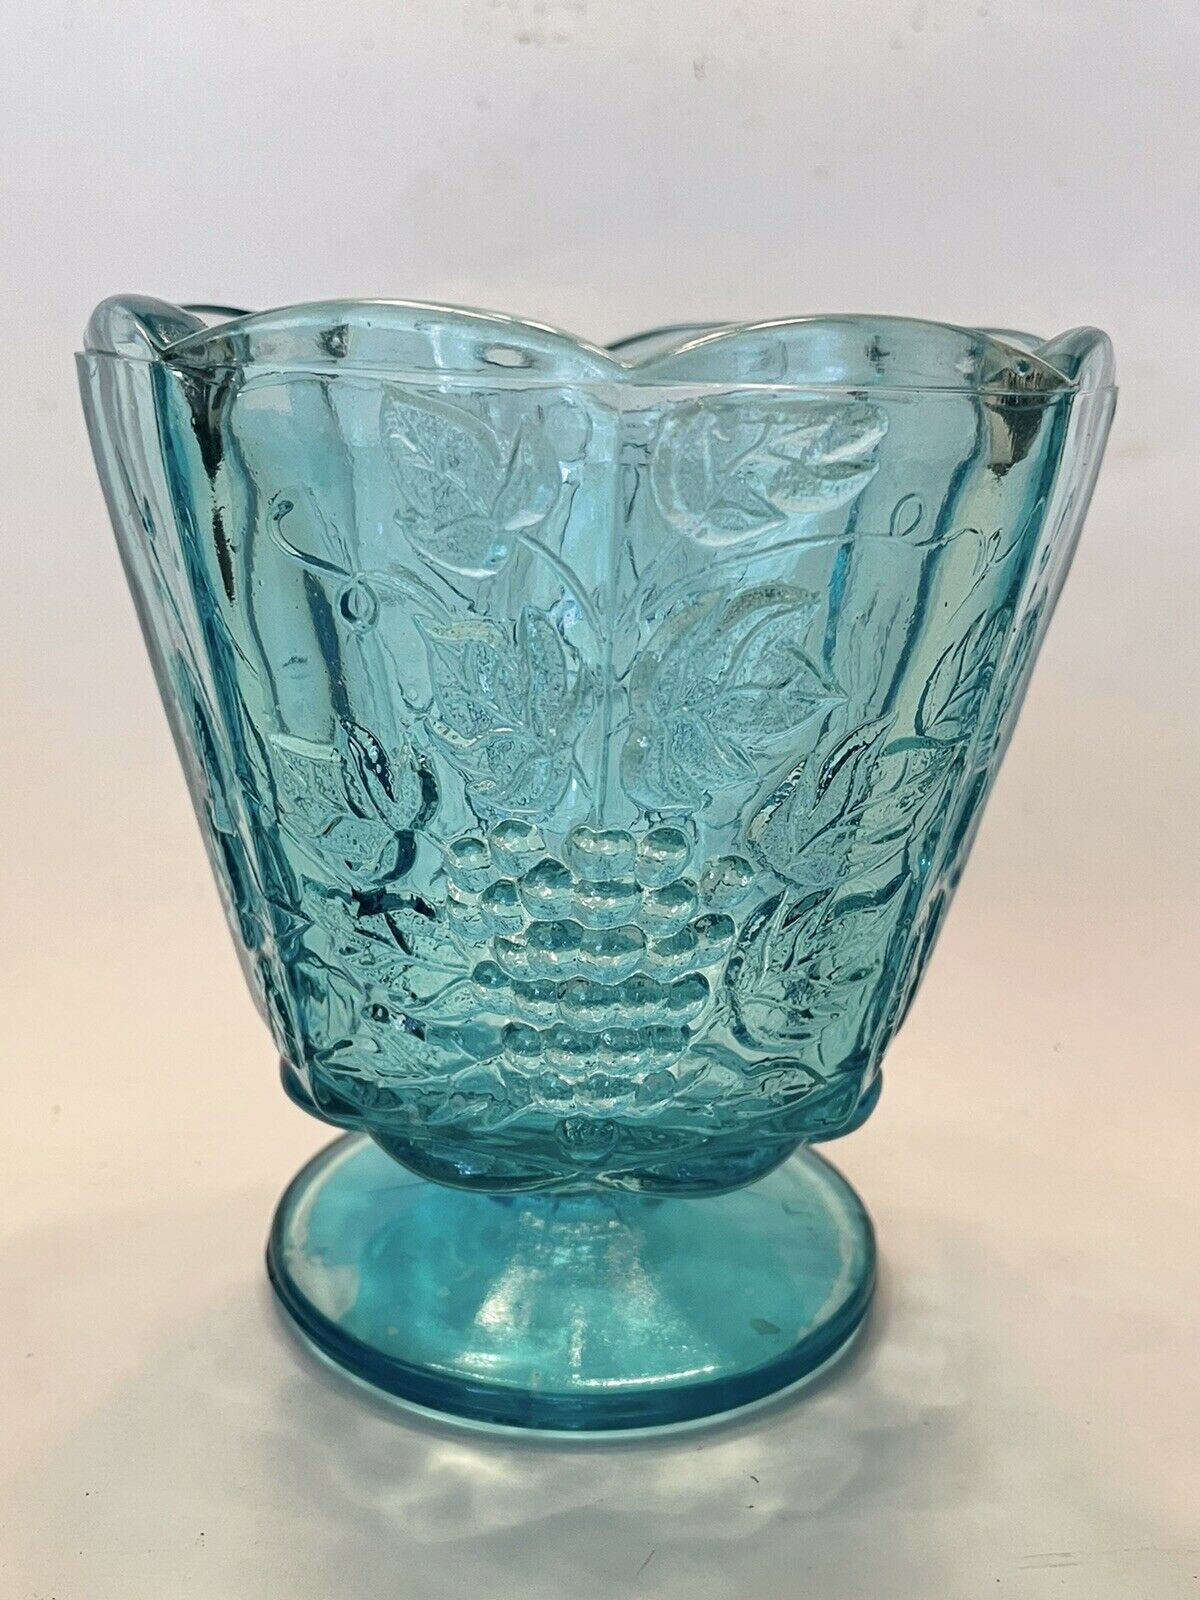 Paneled Bowl Compote With Grapes And Leaves -  Aqua Blue Glass Vintage Scallop